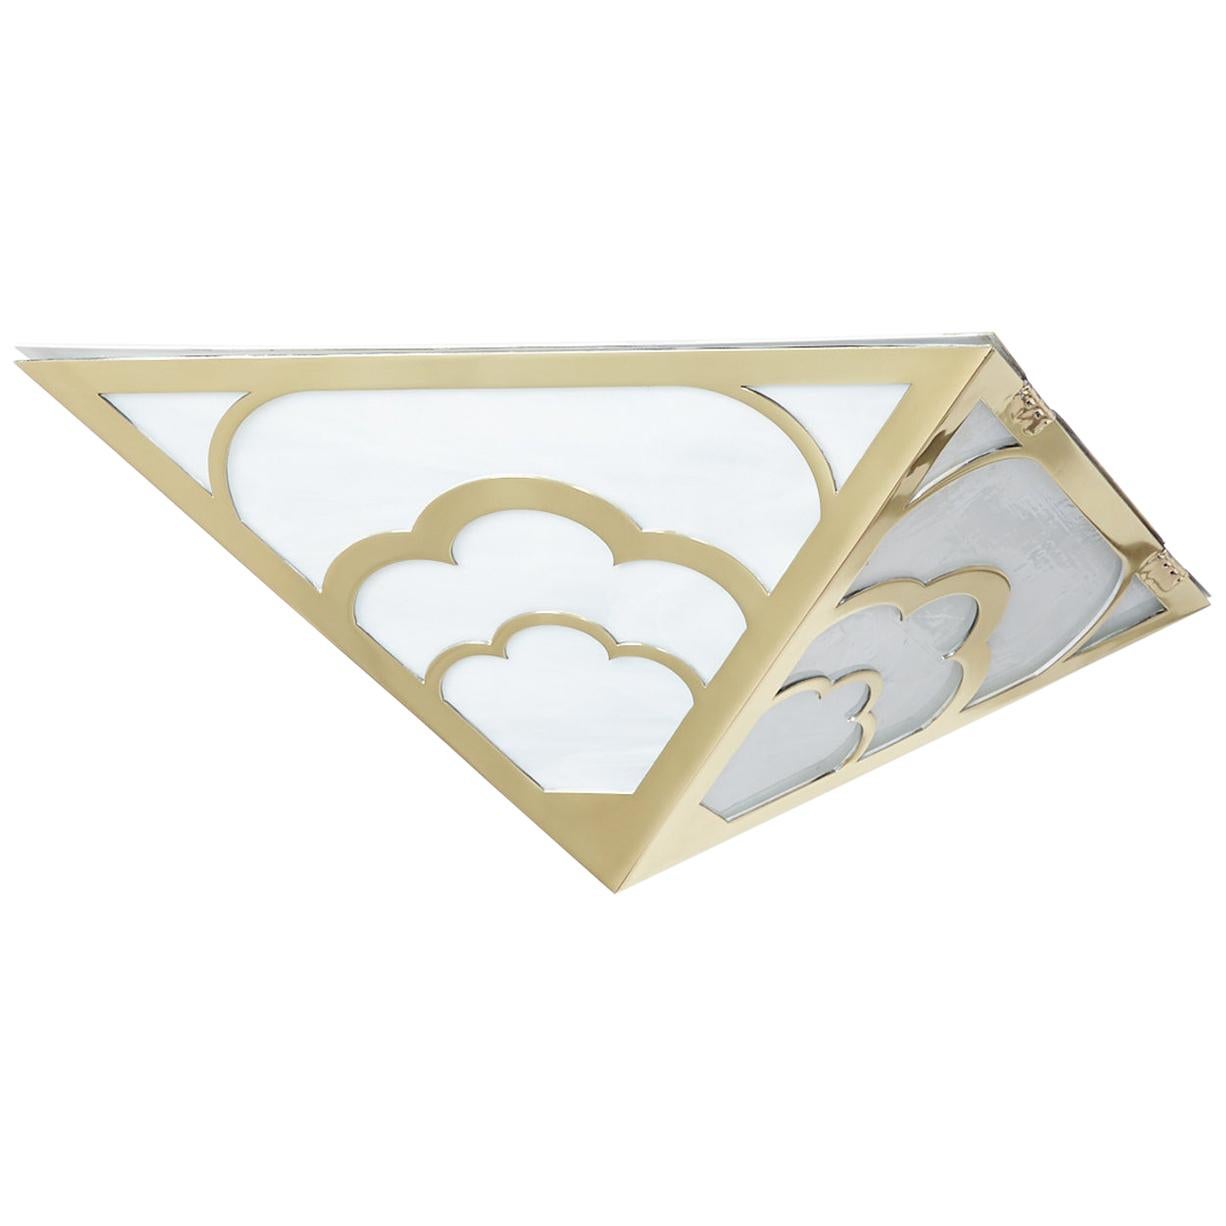 Nuages Deco Flush Mount in Brass by David Duncan